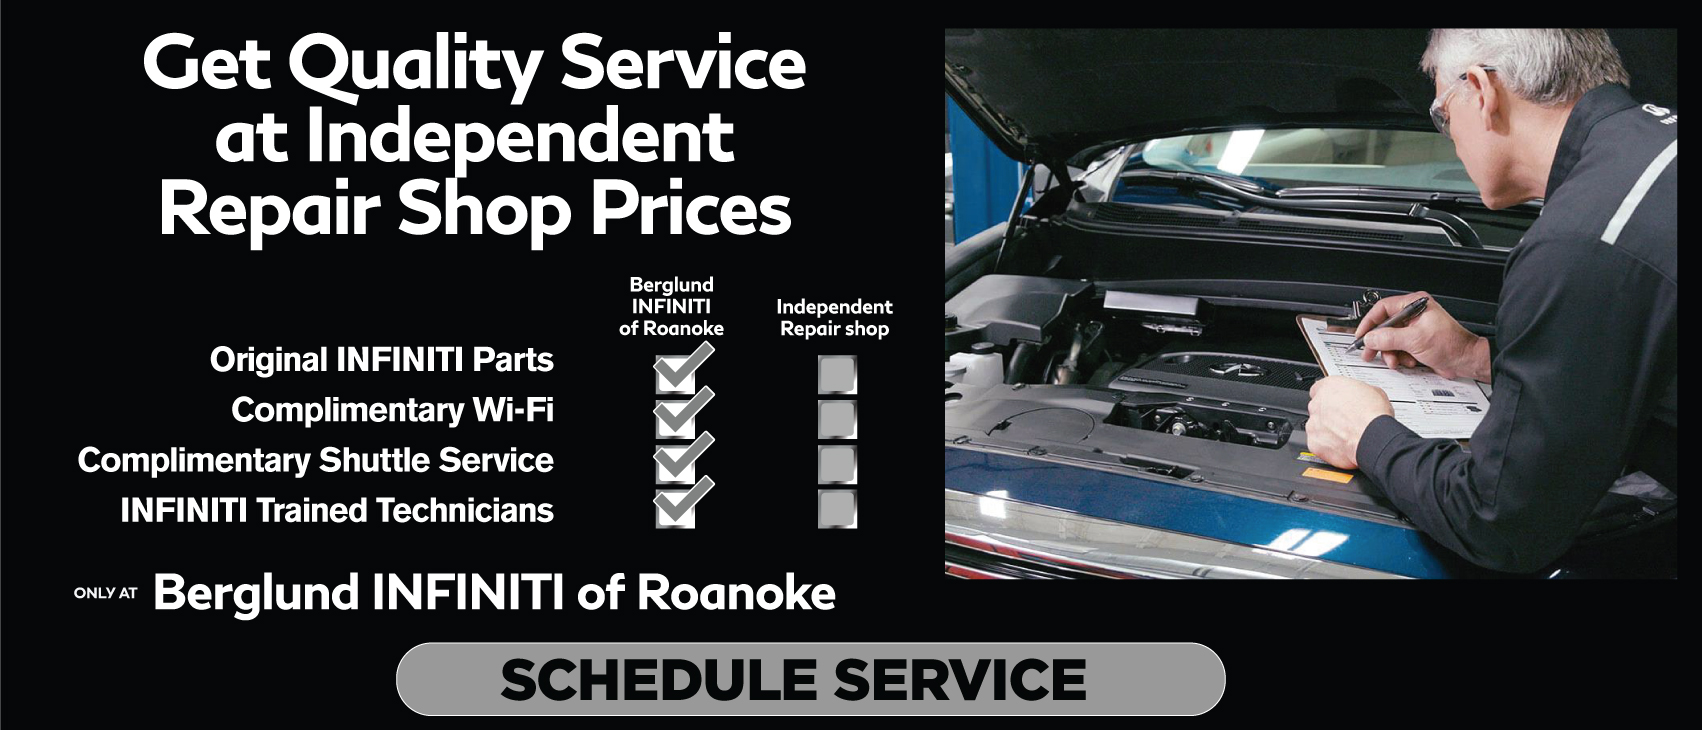 Get Quality Serviceat IndependentRepair Shop Prices. Click to Schedule Service.